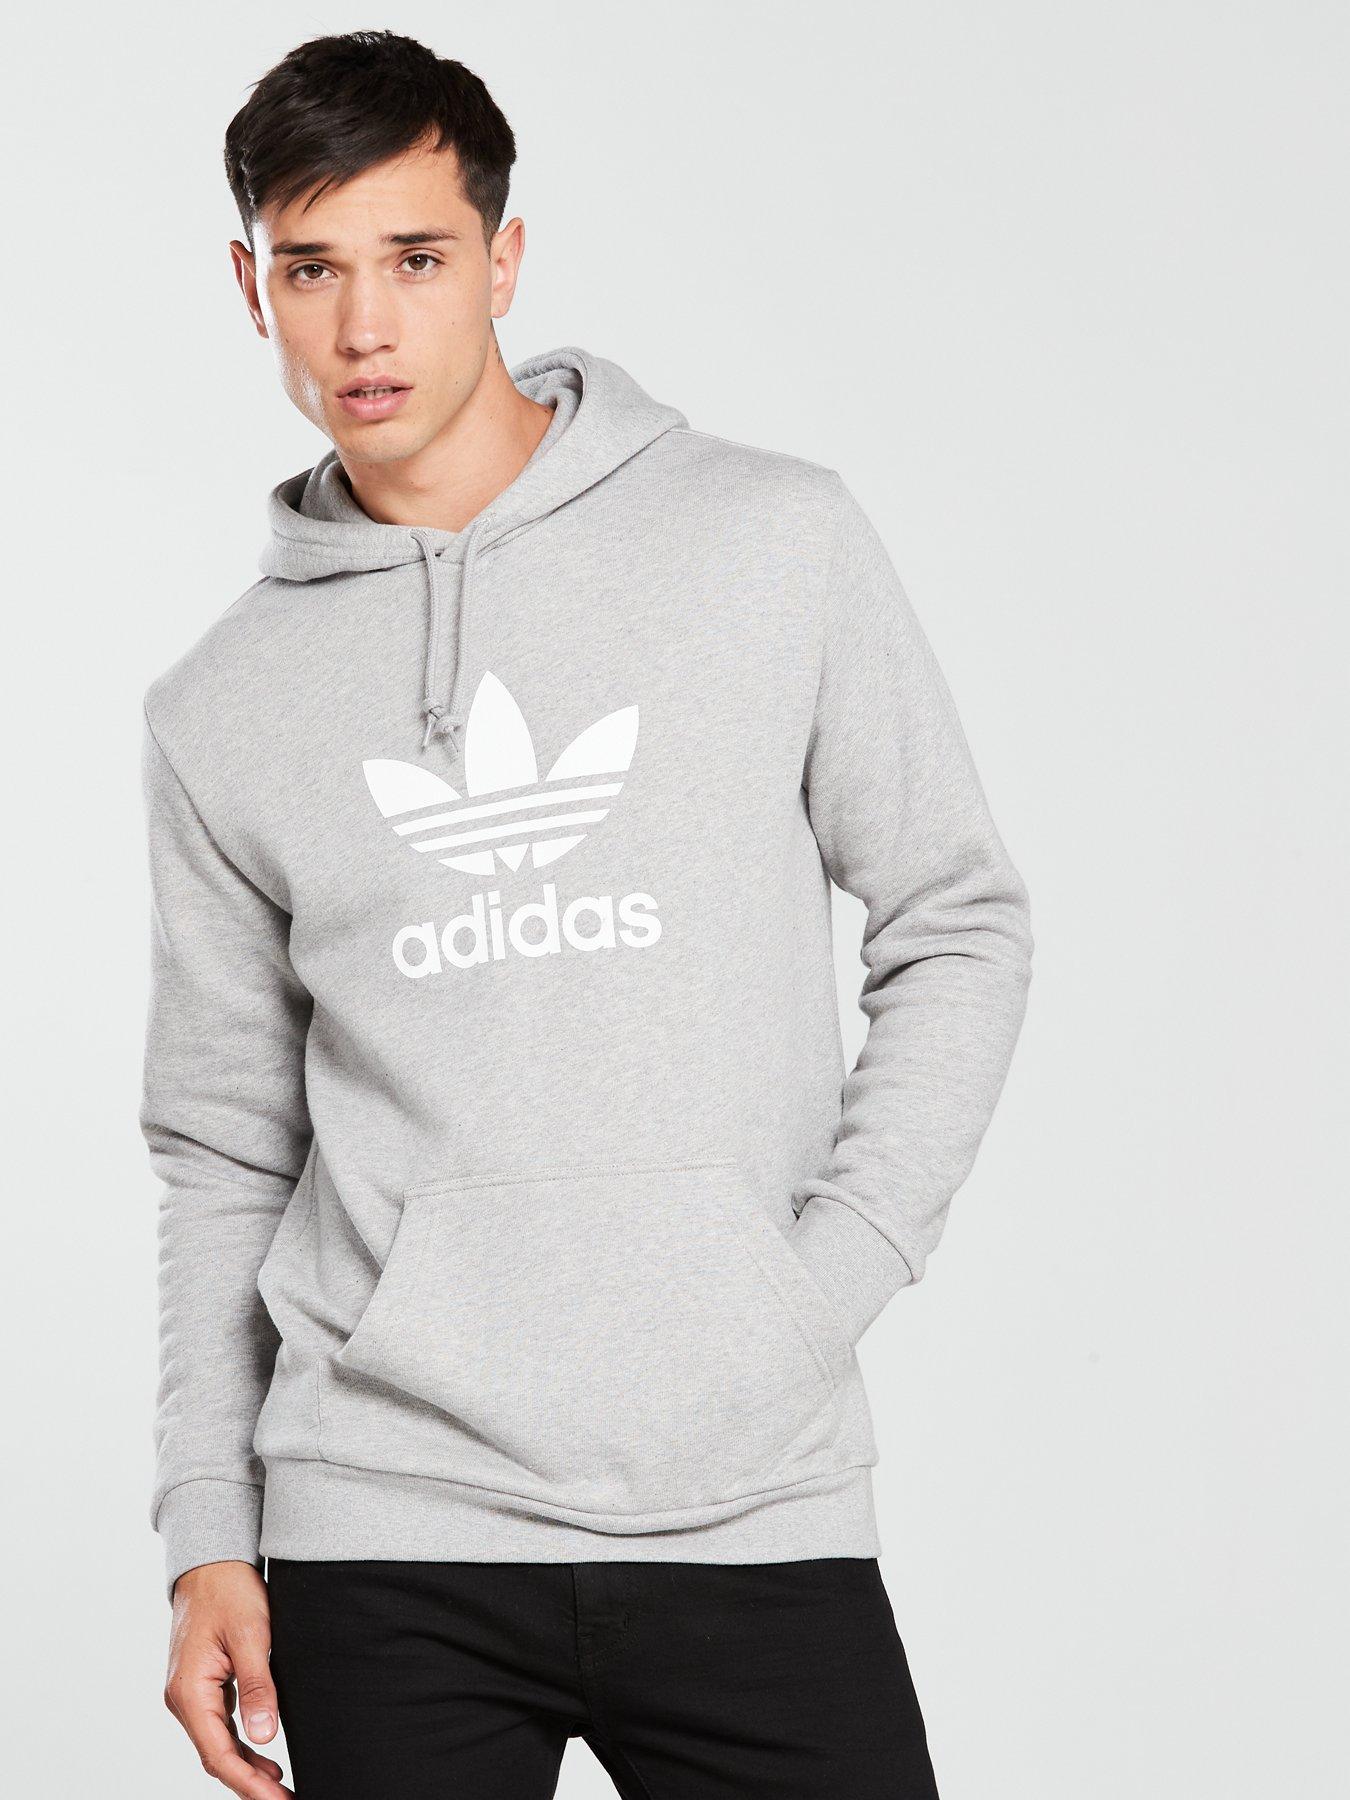 adidas classic pullover hoodie